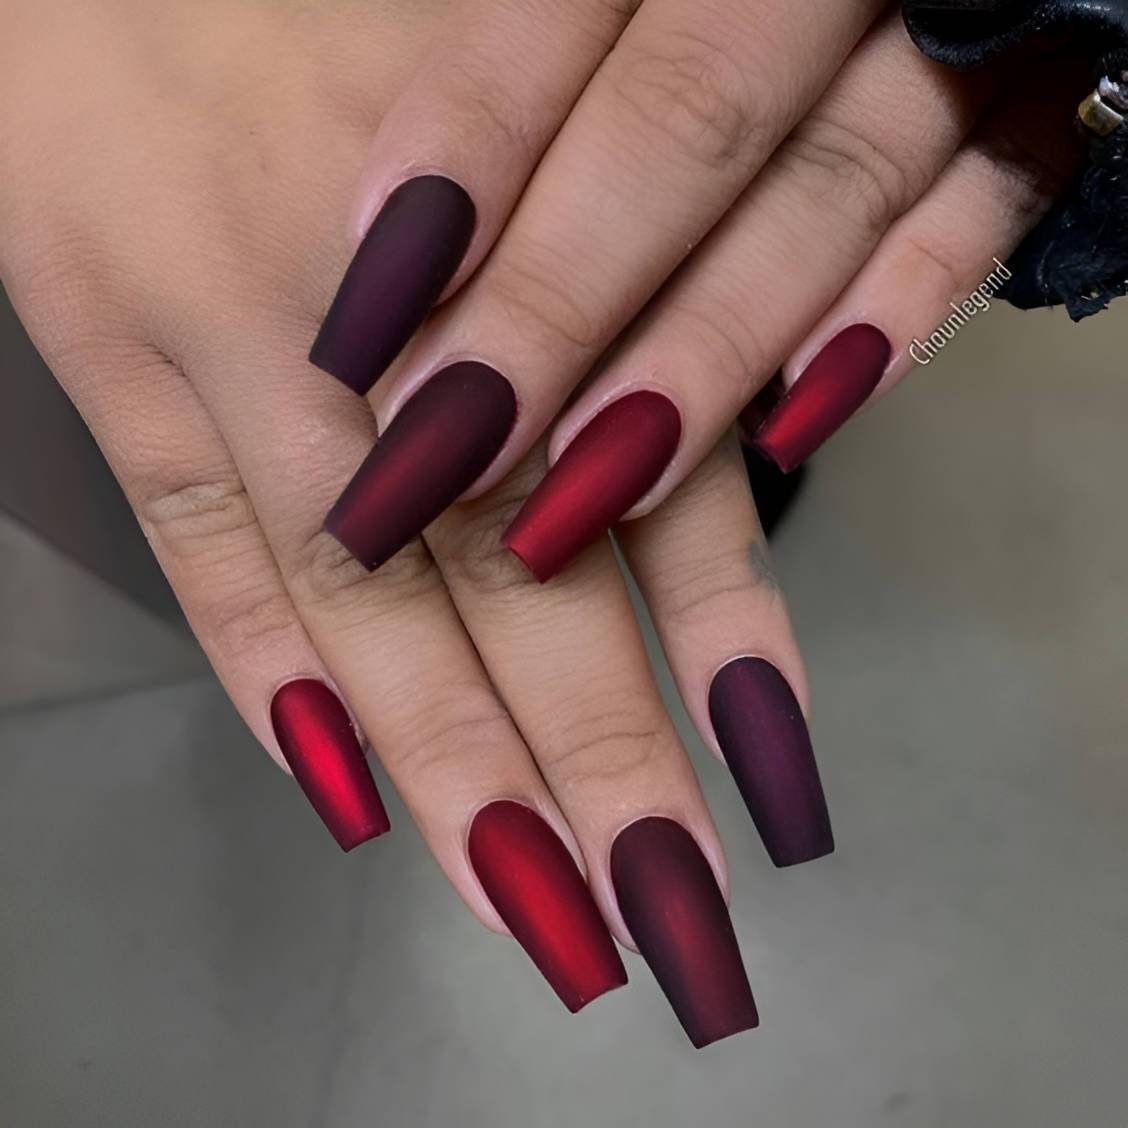 27 Glamorous Red Manicures To Make You Irresistible - 221